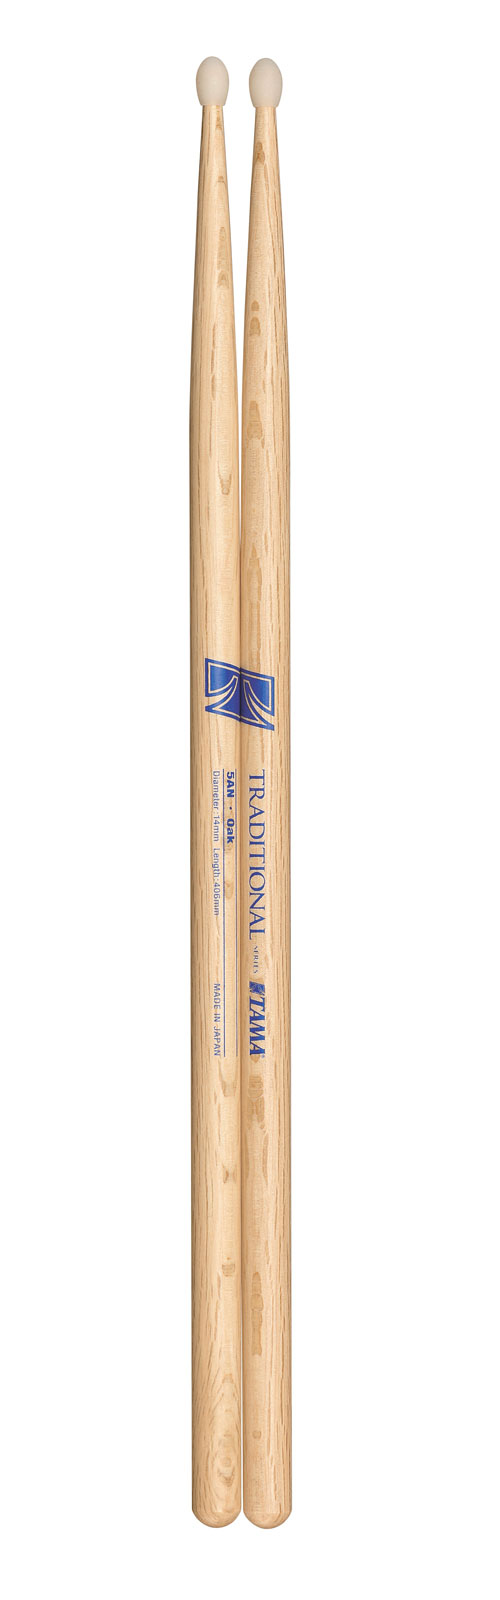 TAMA 5AN - TRADITIONAL SERIES - DRUMSTICK JAPANESE OAK - 14MM - SMALL TIP NYLON OVALE 